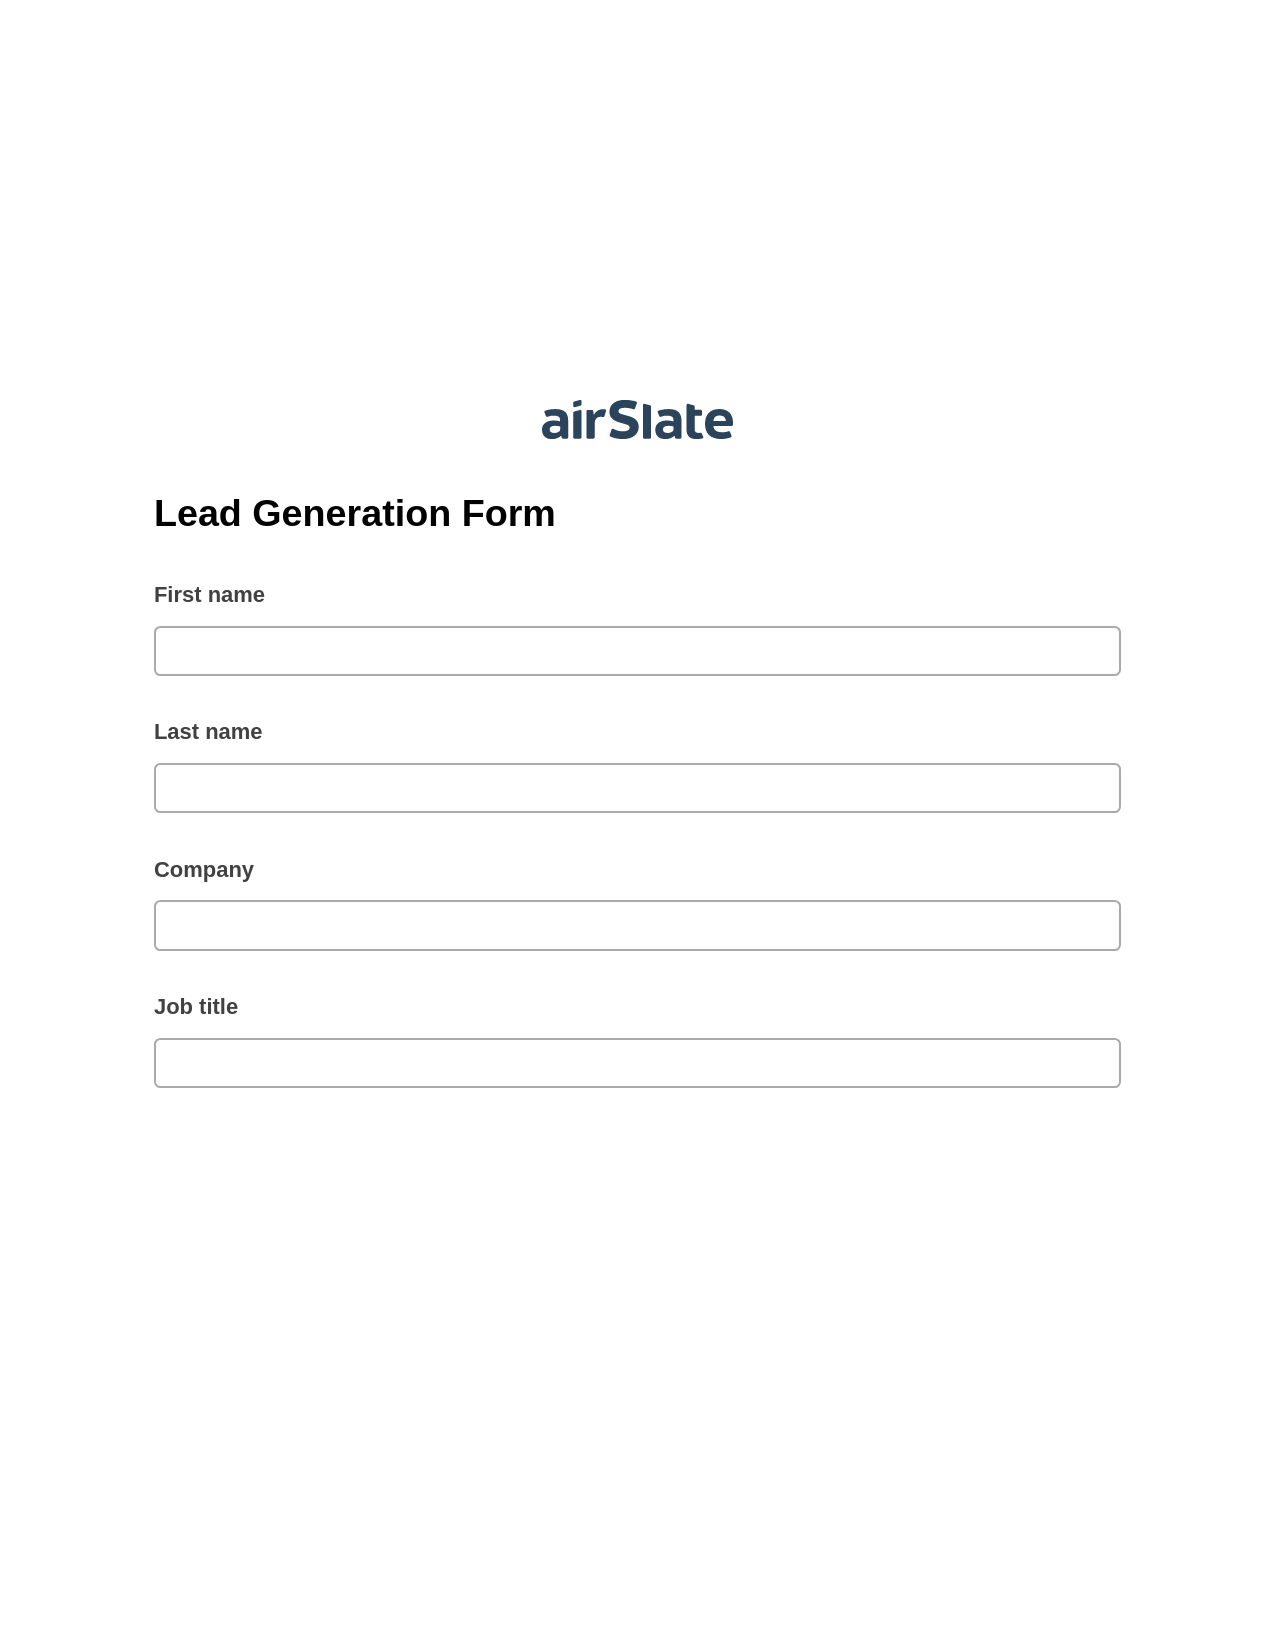 Multirole Lead Generation Form Pre-fill from CSV File Bot, Create slate bot, Email Notification Postfinish Bot